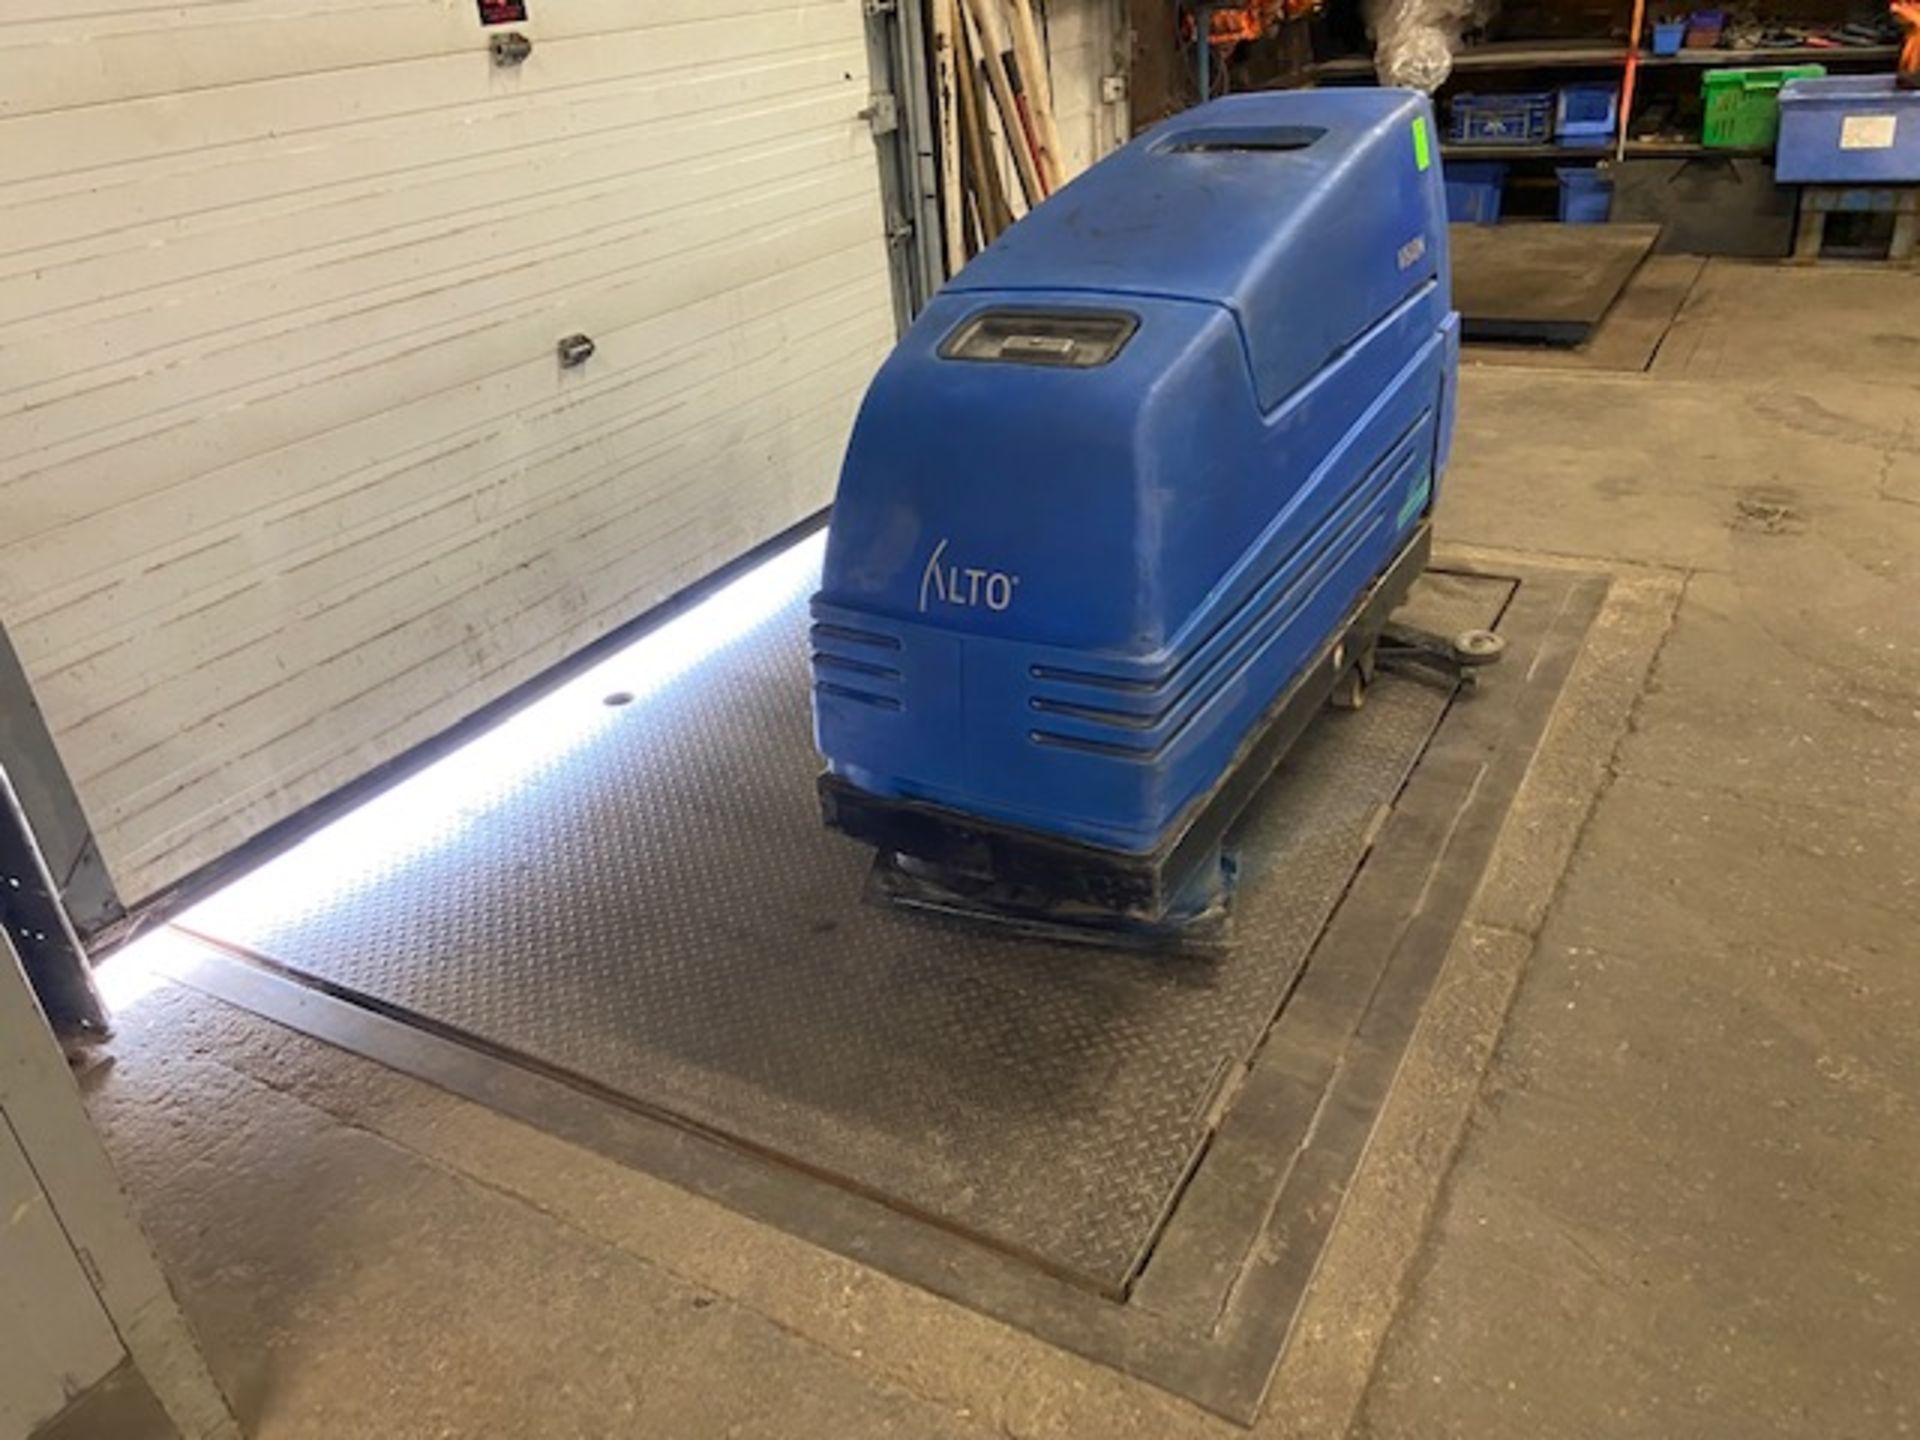 Clark Walk Behind Electric Sweeper Scrubber Unit - Clark vision - missing front brush unit - Image 2 of 3